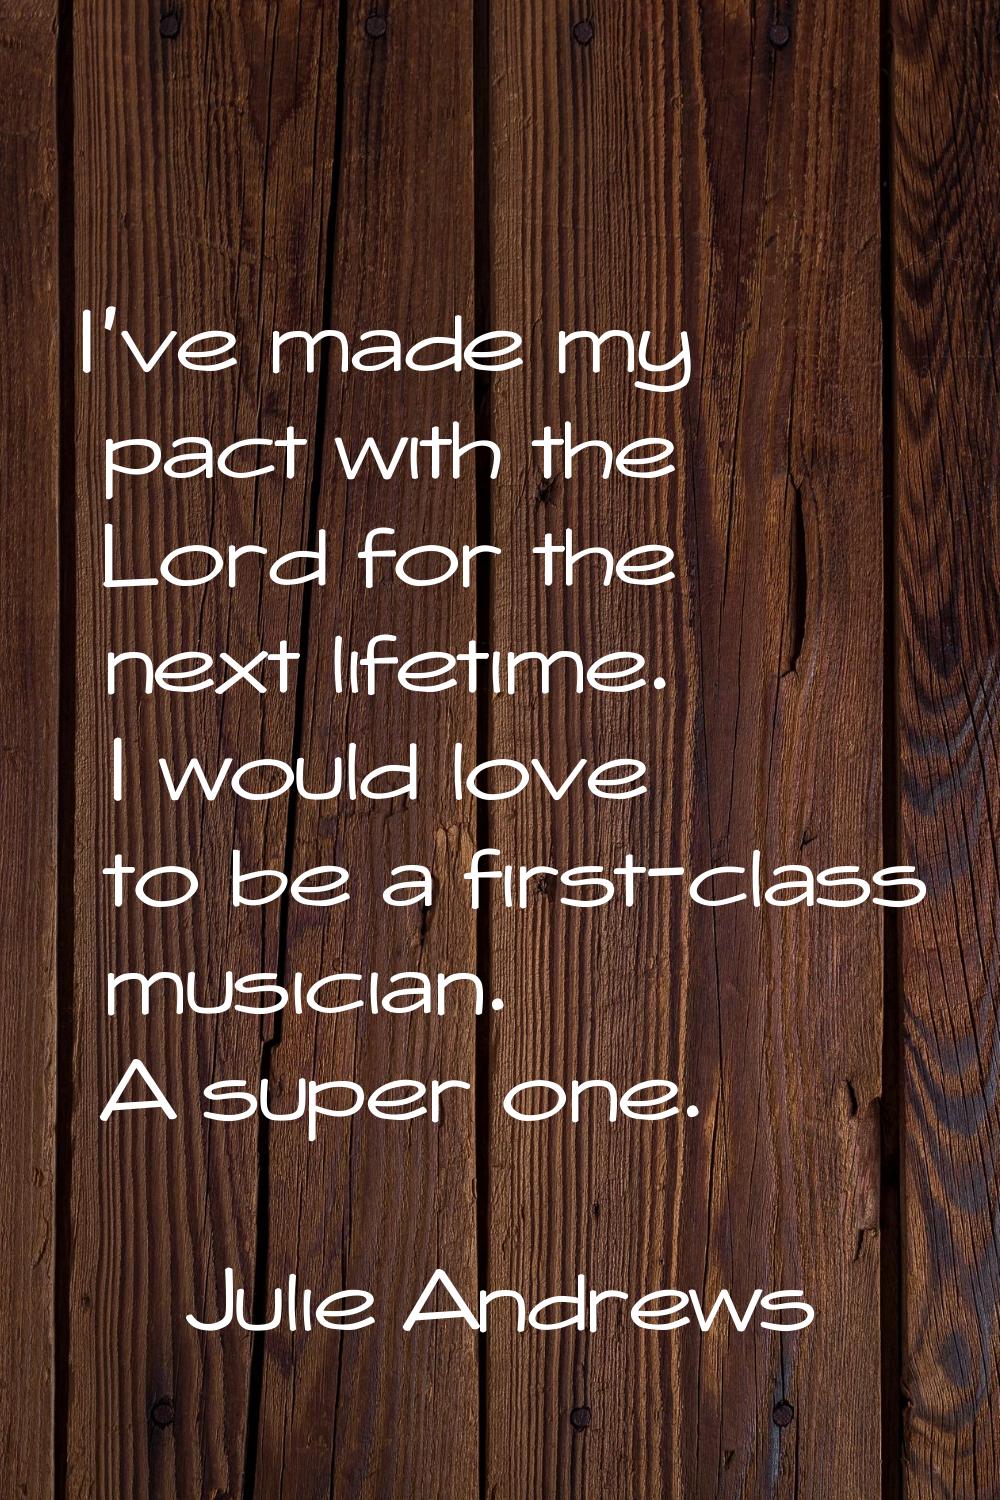 I've made my pact with the Lord for the next lifetime. I would love to be a first-class musician. A